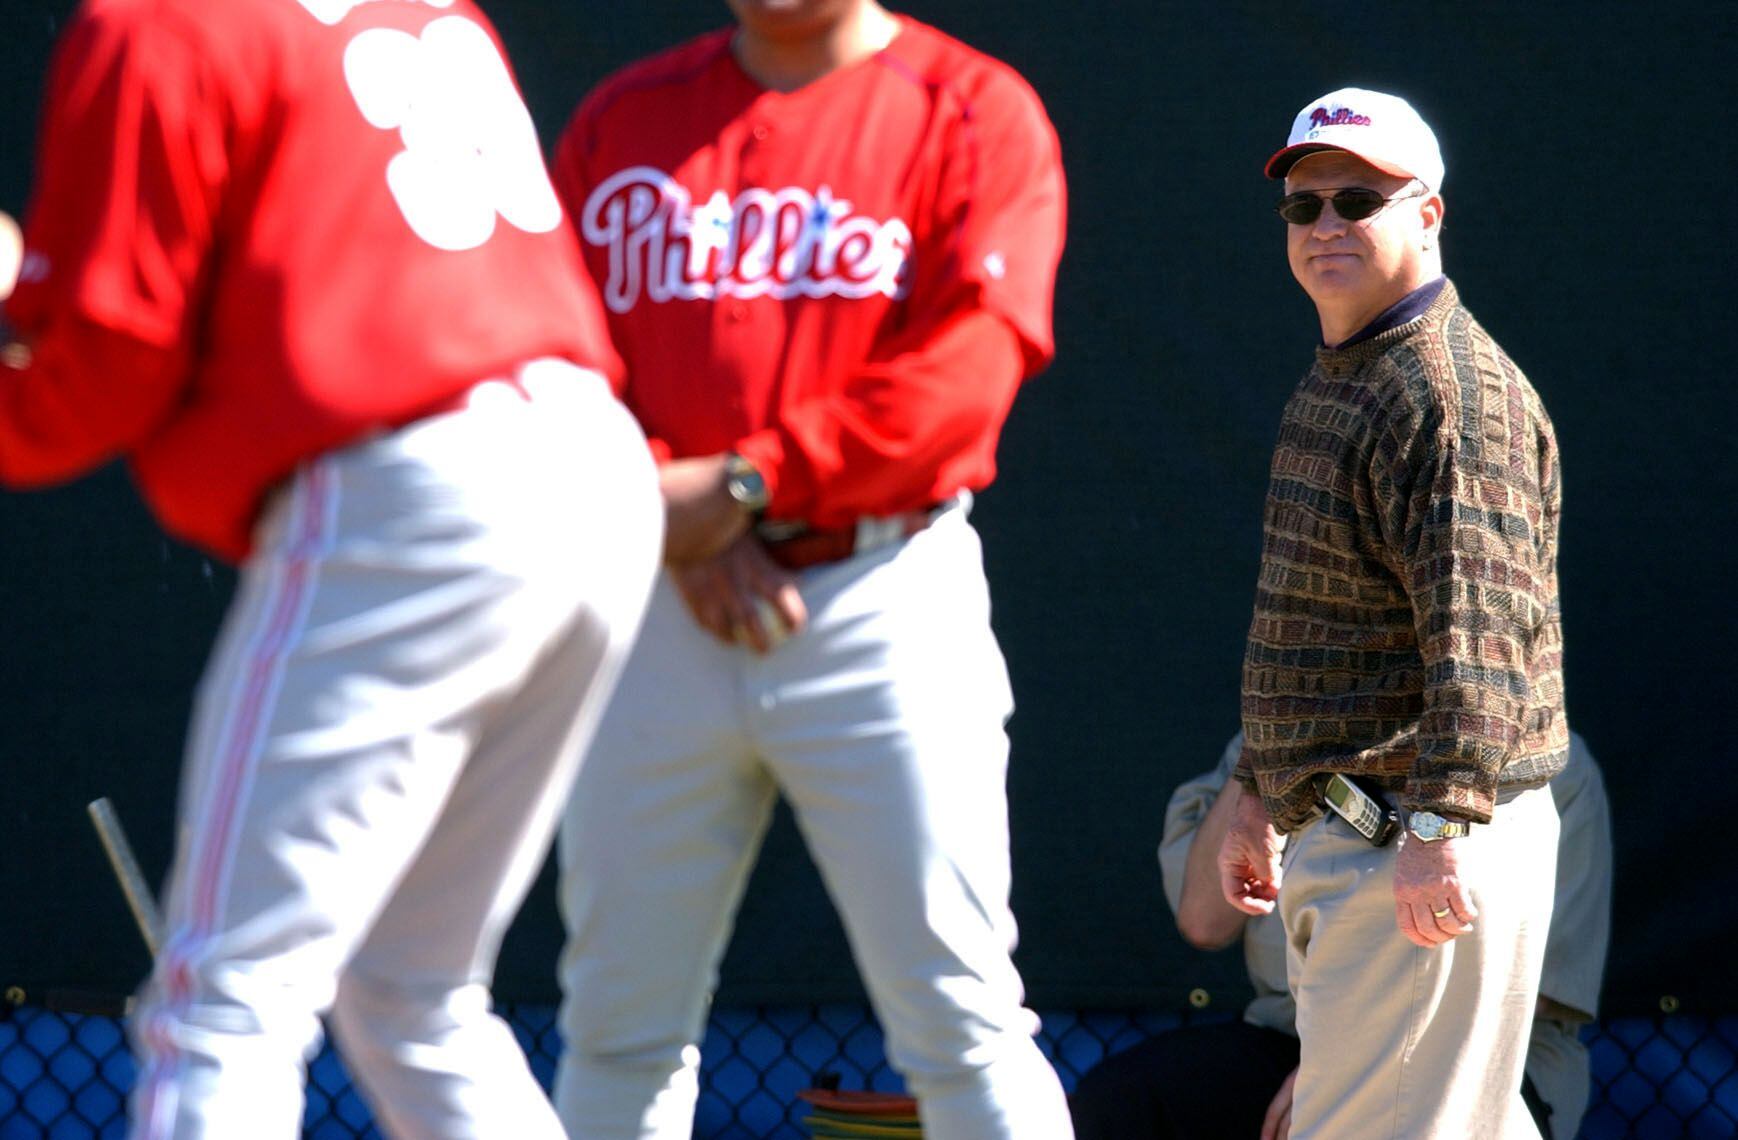 Former Phillies scout Mike Arbuckle retires after 40 years in baseball